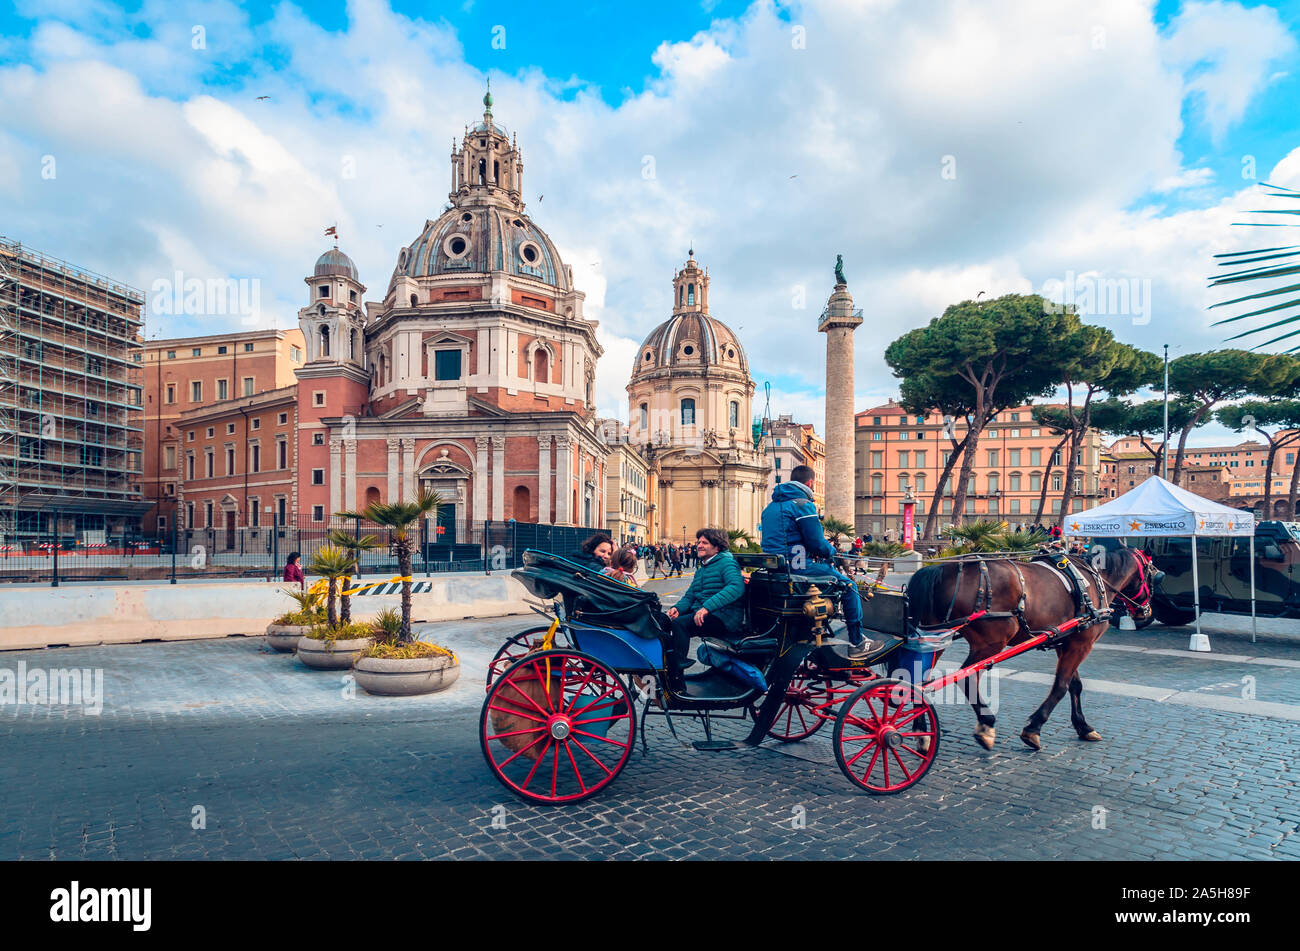 View of Piazza Venezia, situated in the heart of the city, short distance from Colosseum. Stock Photo